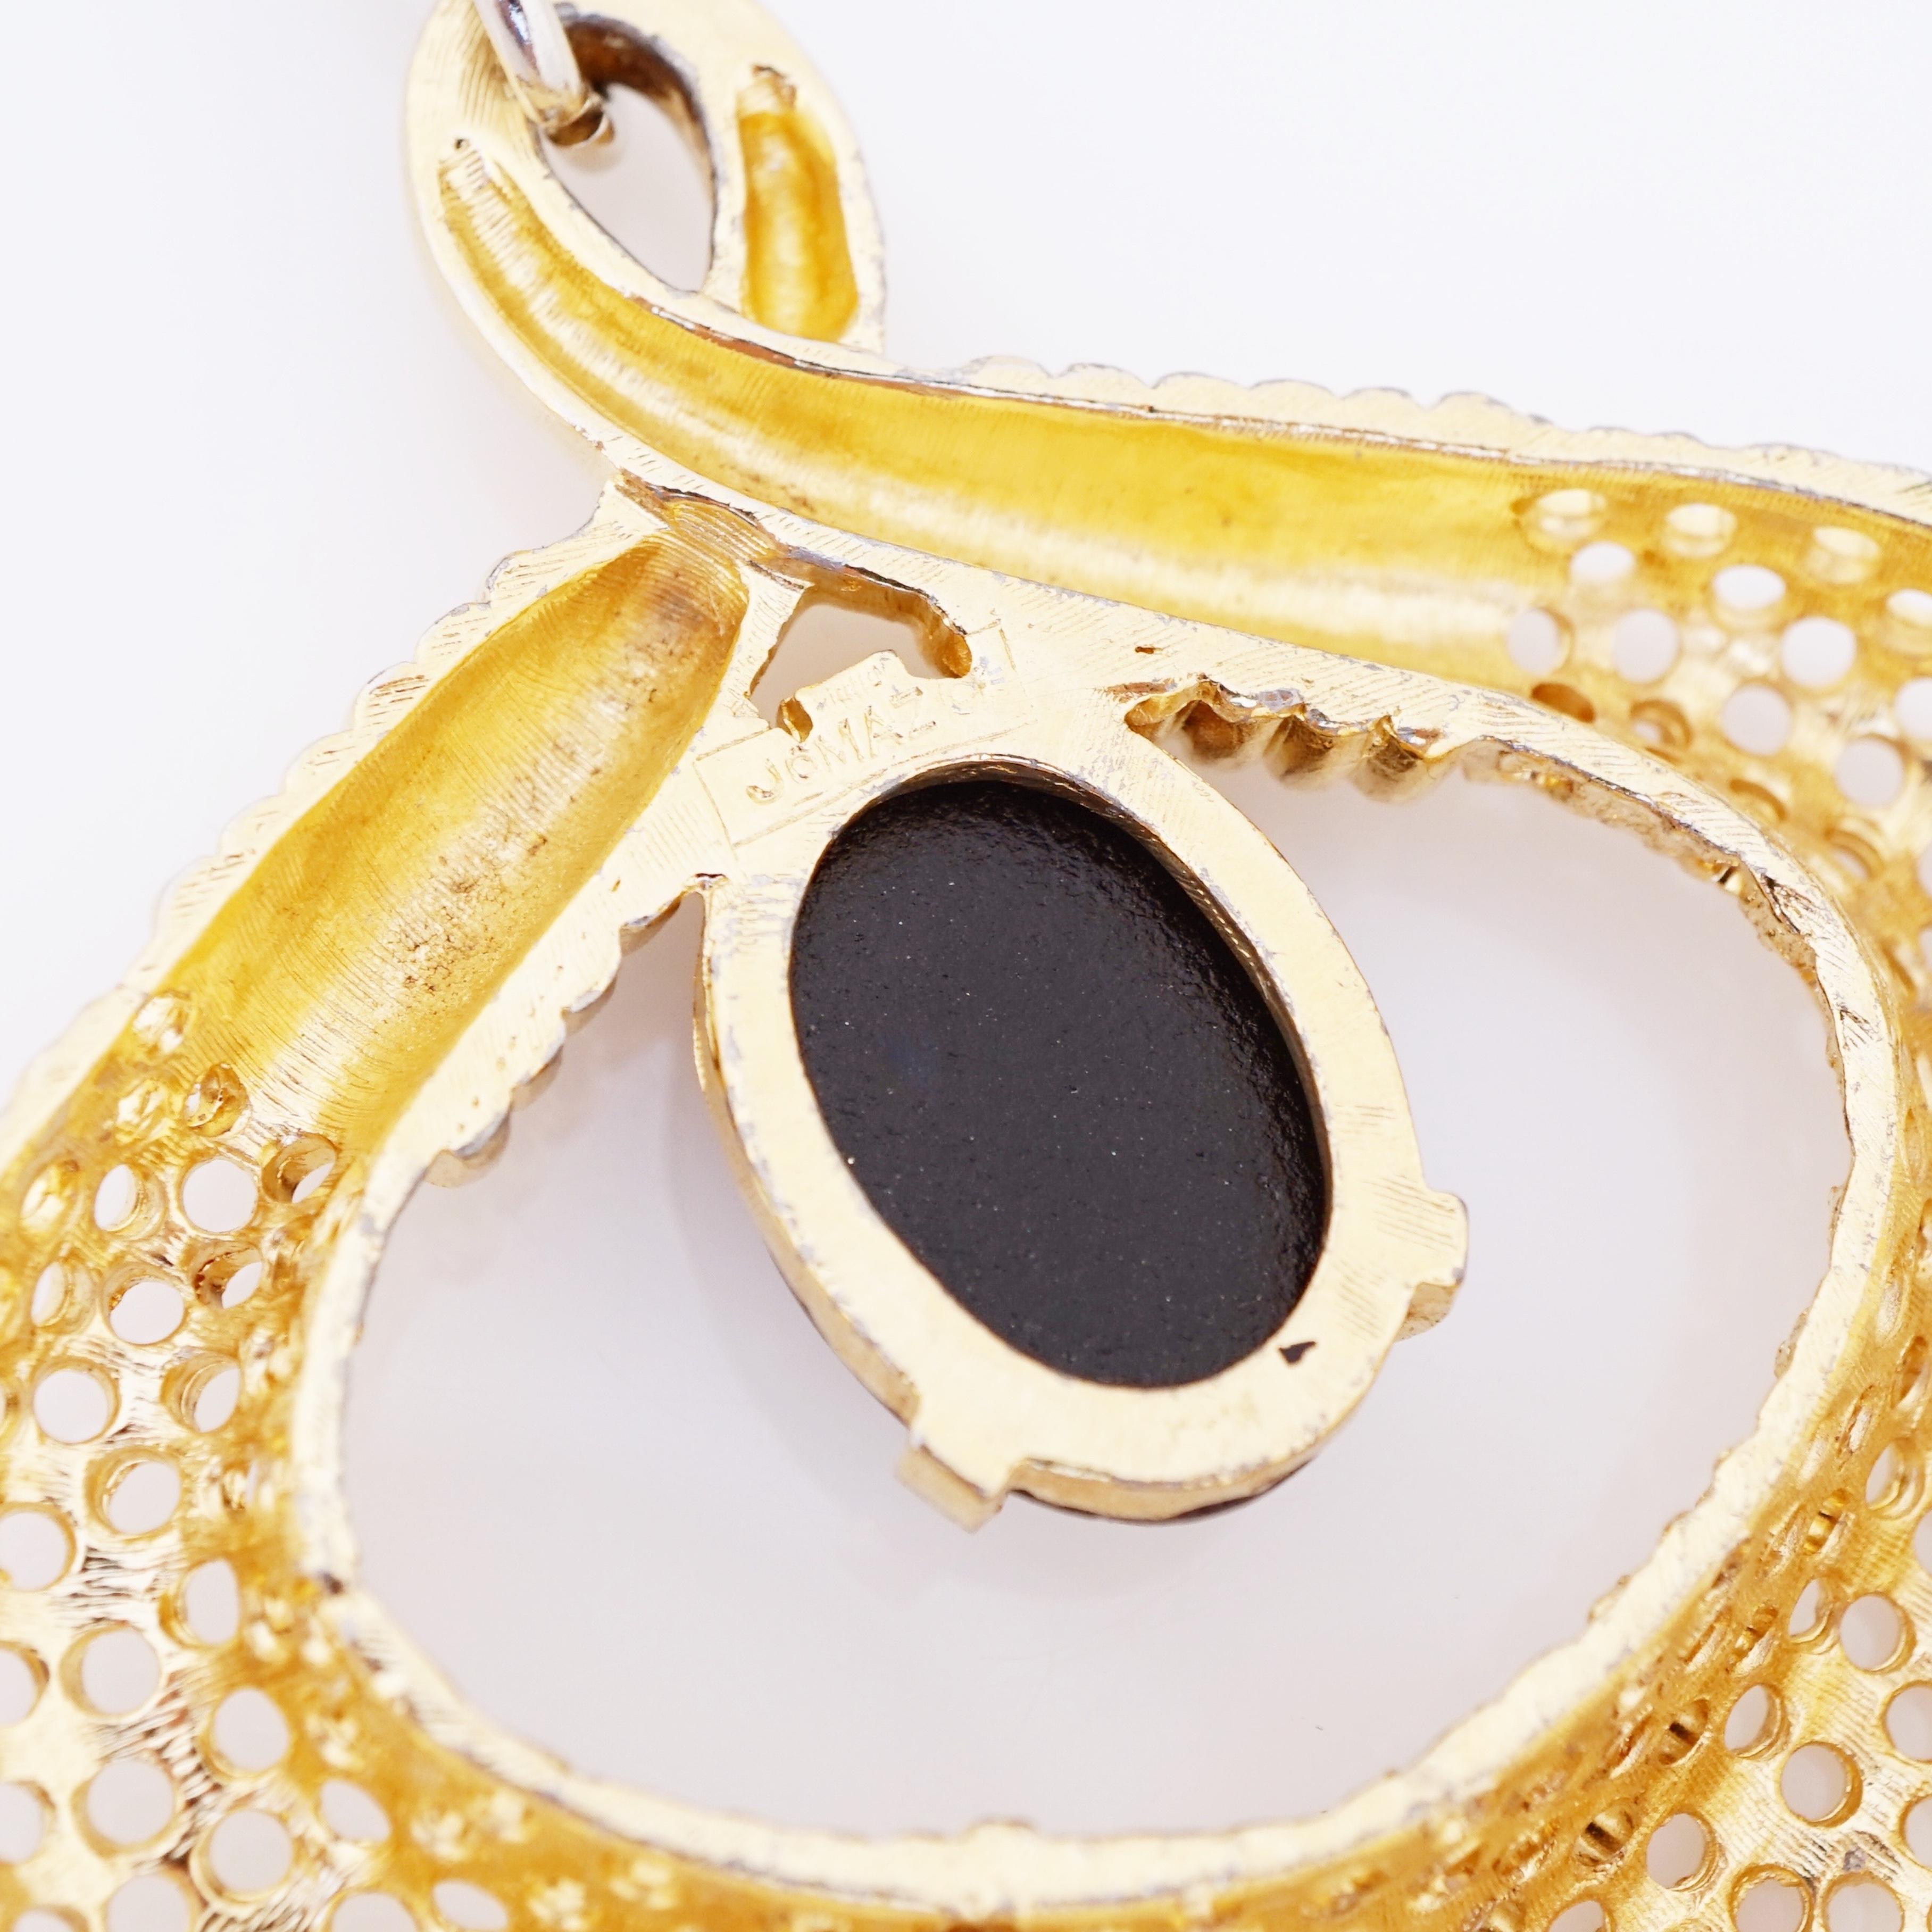 Women's Gold Mod Pendant Statement Necklace With Onyx Cabochon By Jomaz, 1970s For Sale